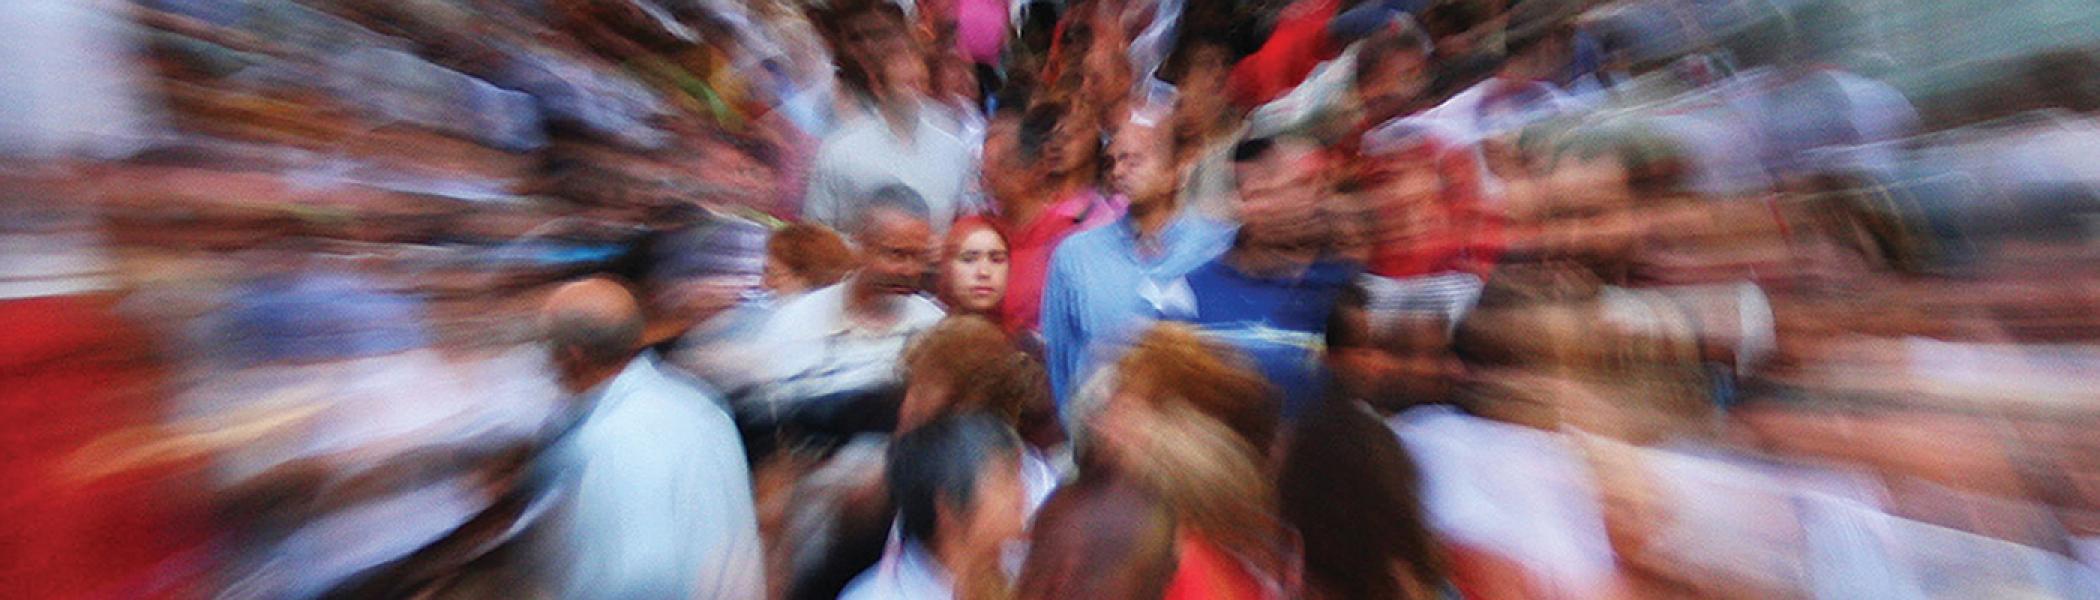 Blurred image of a crowd of people